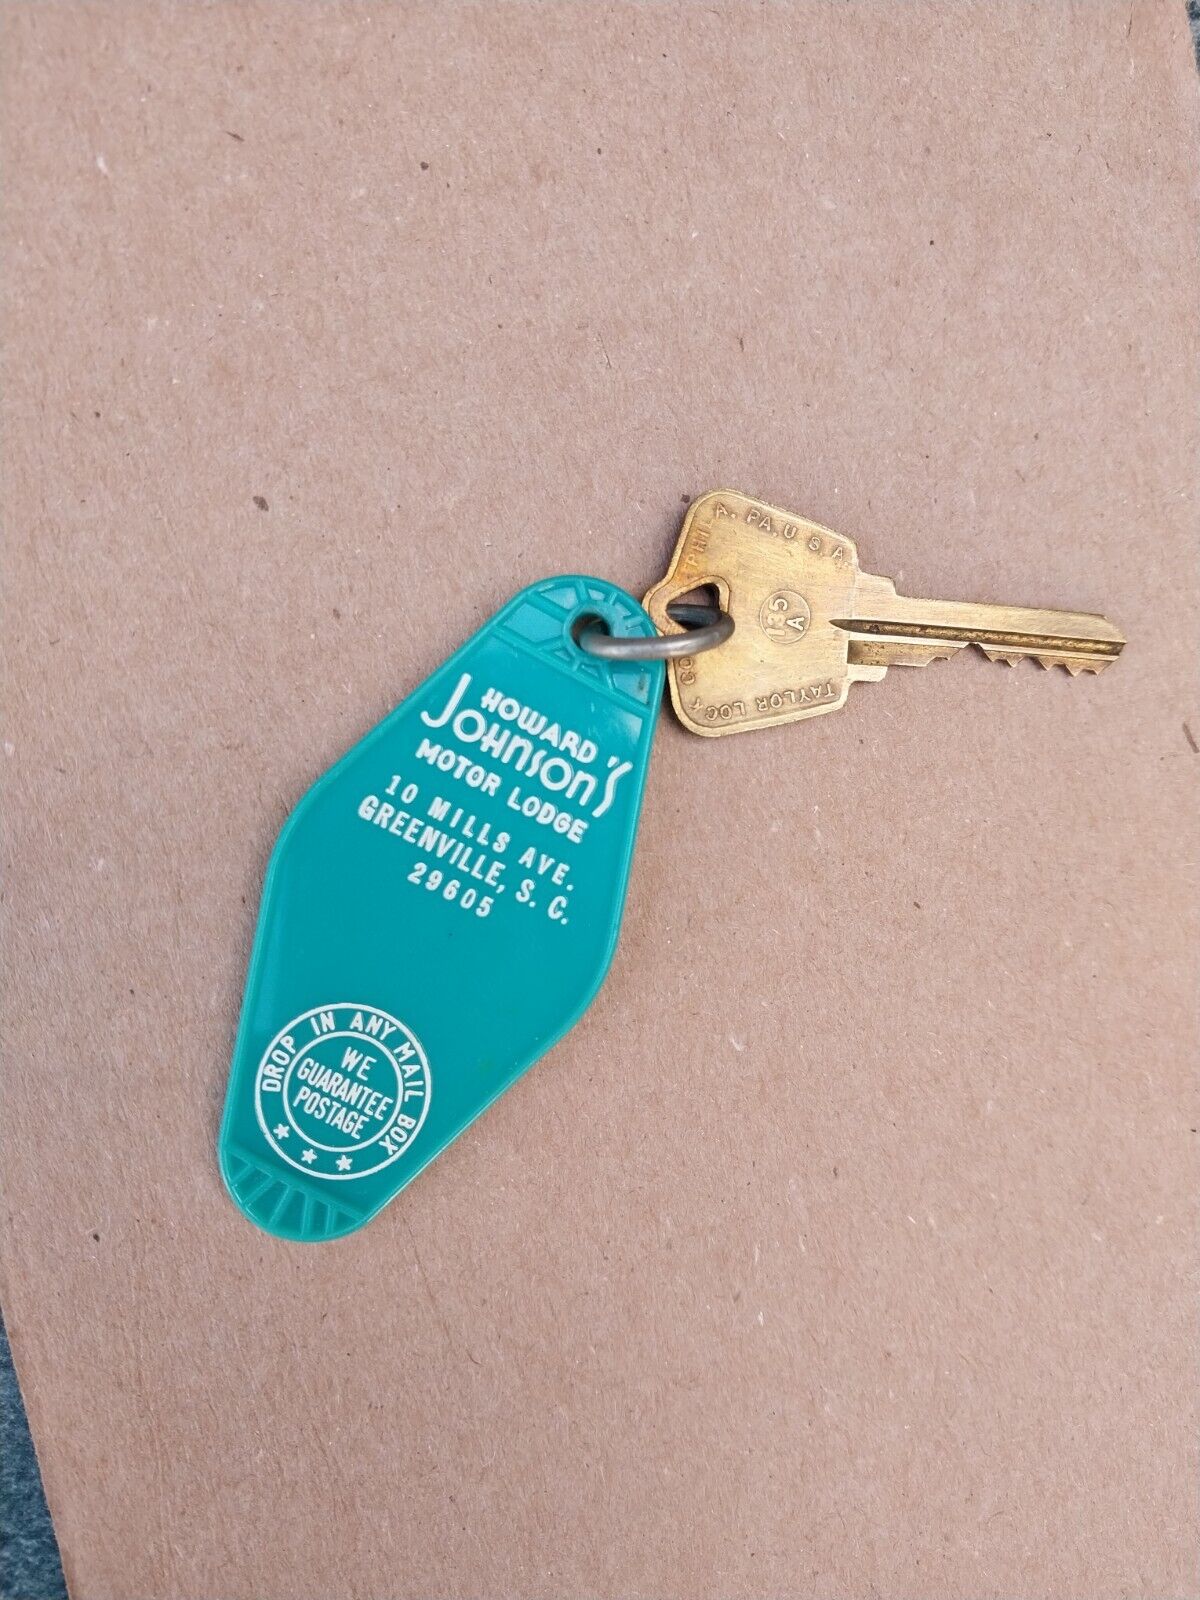 Rare Howard Johnsons Motor Lodge Key And Turquoise Fob Greenville, S.C.